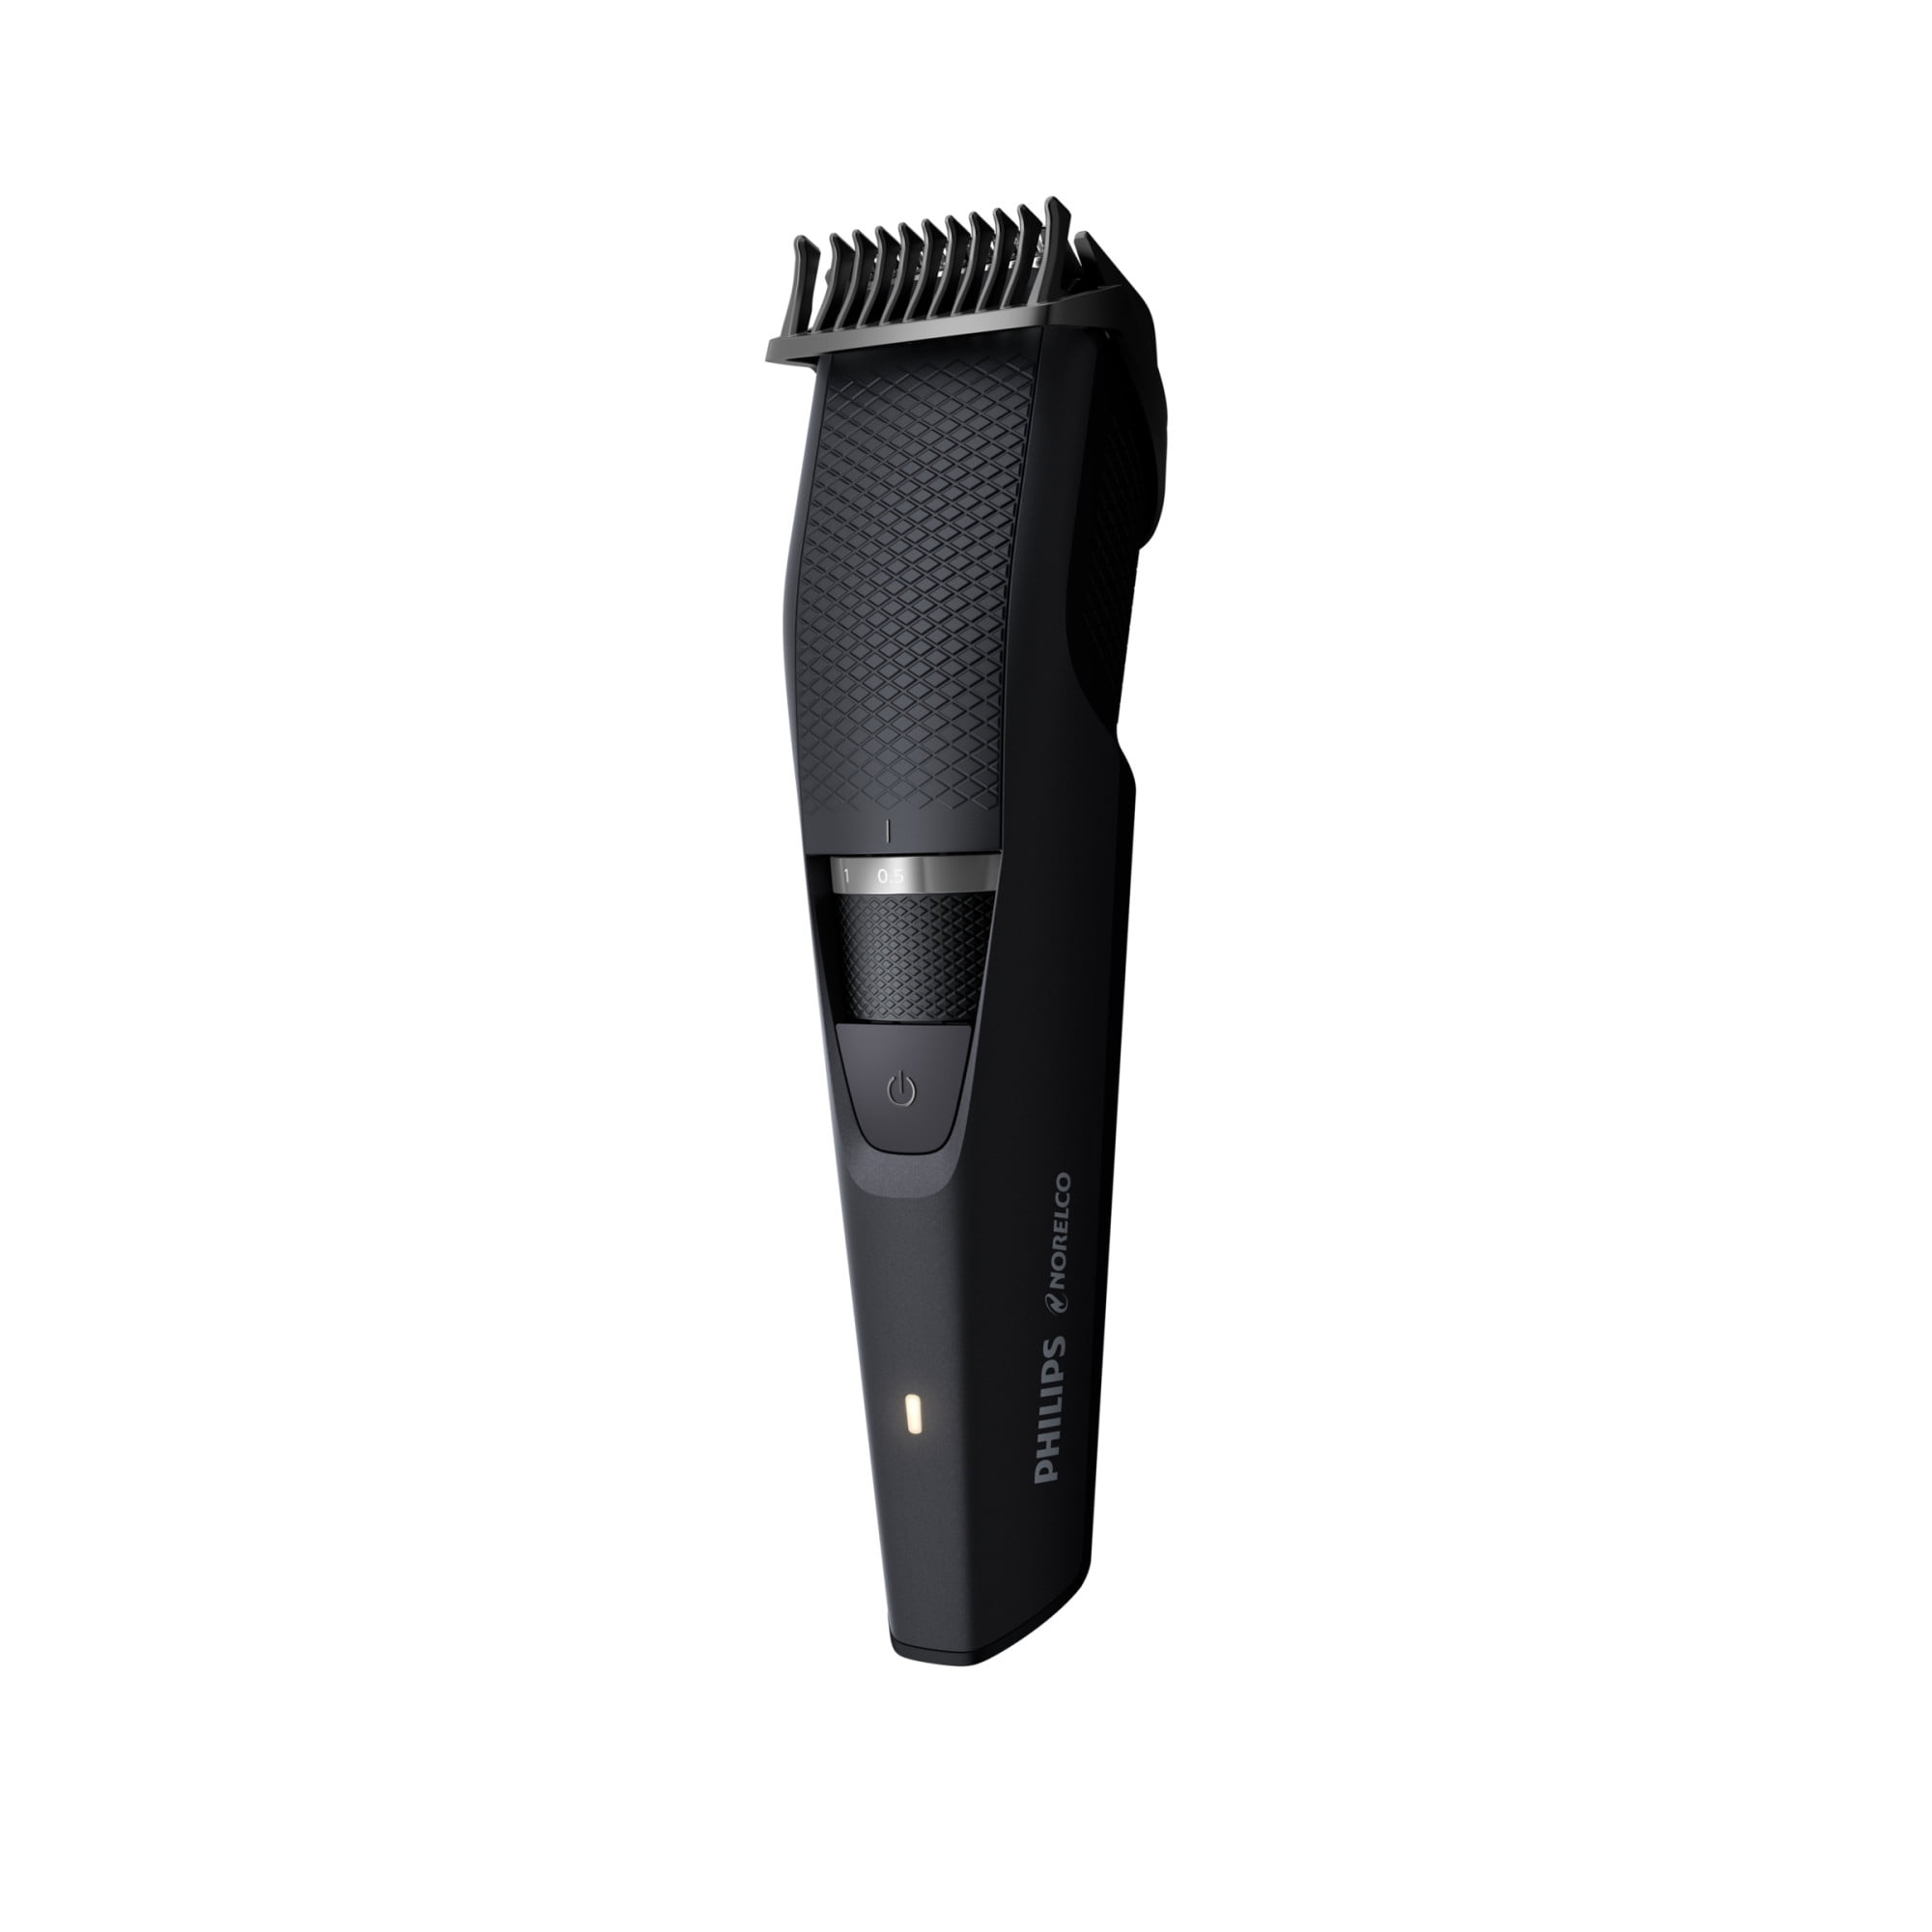 philips trimmer price